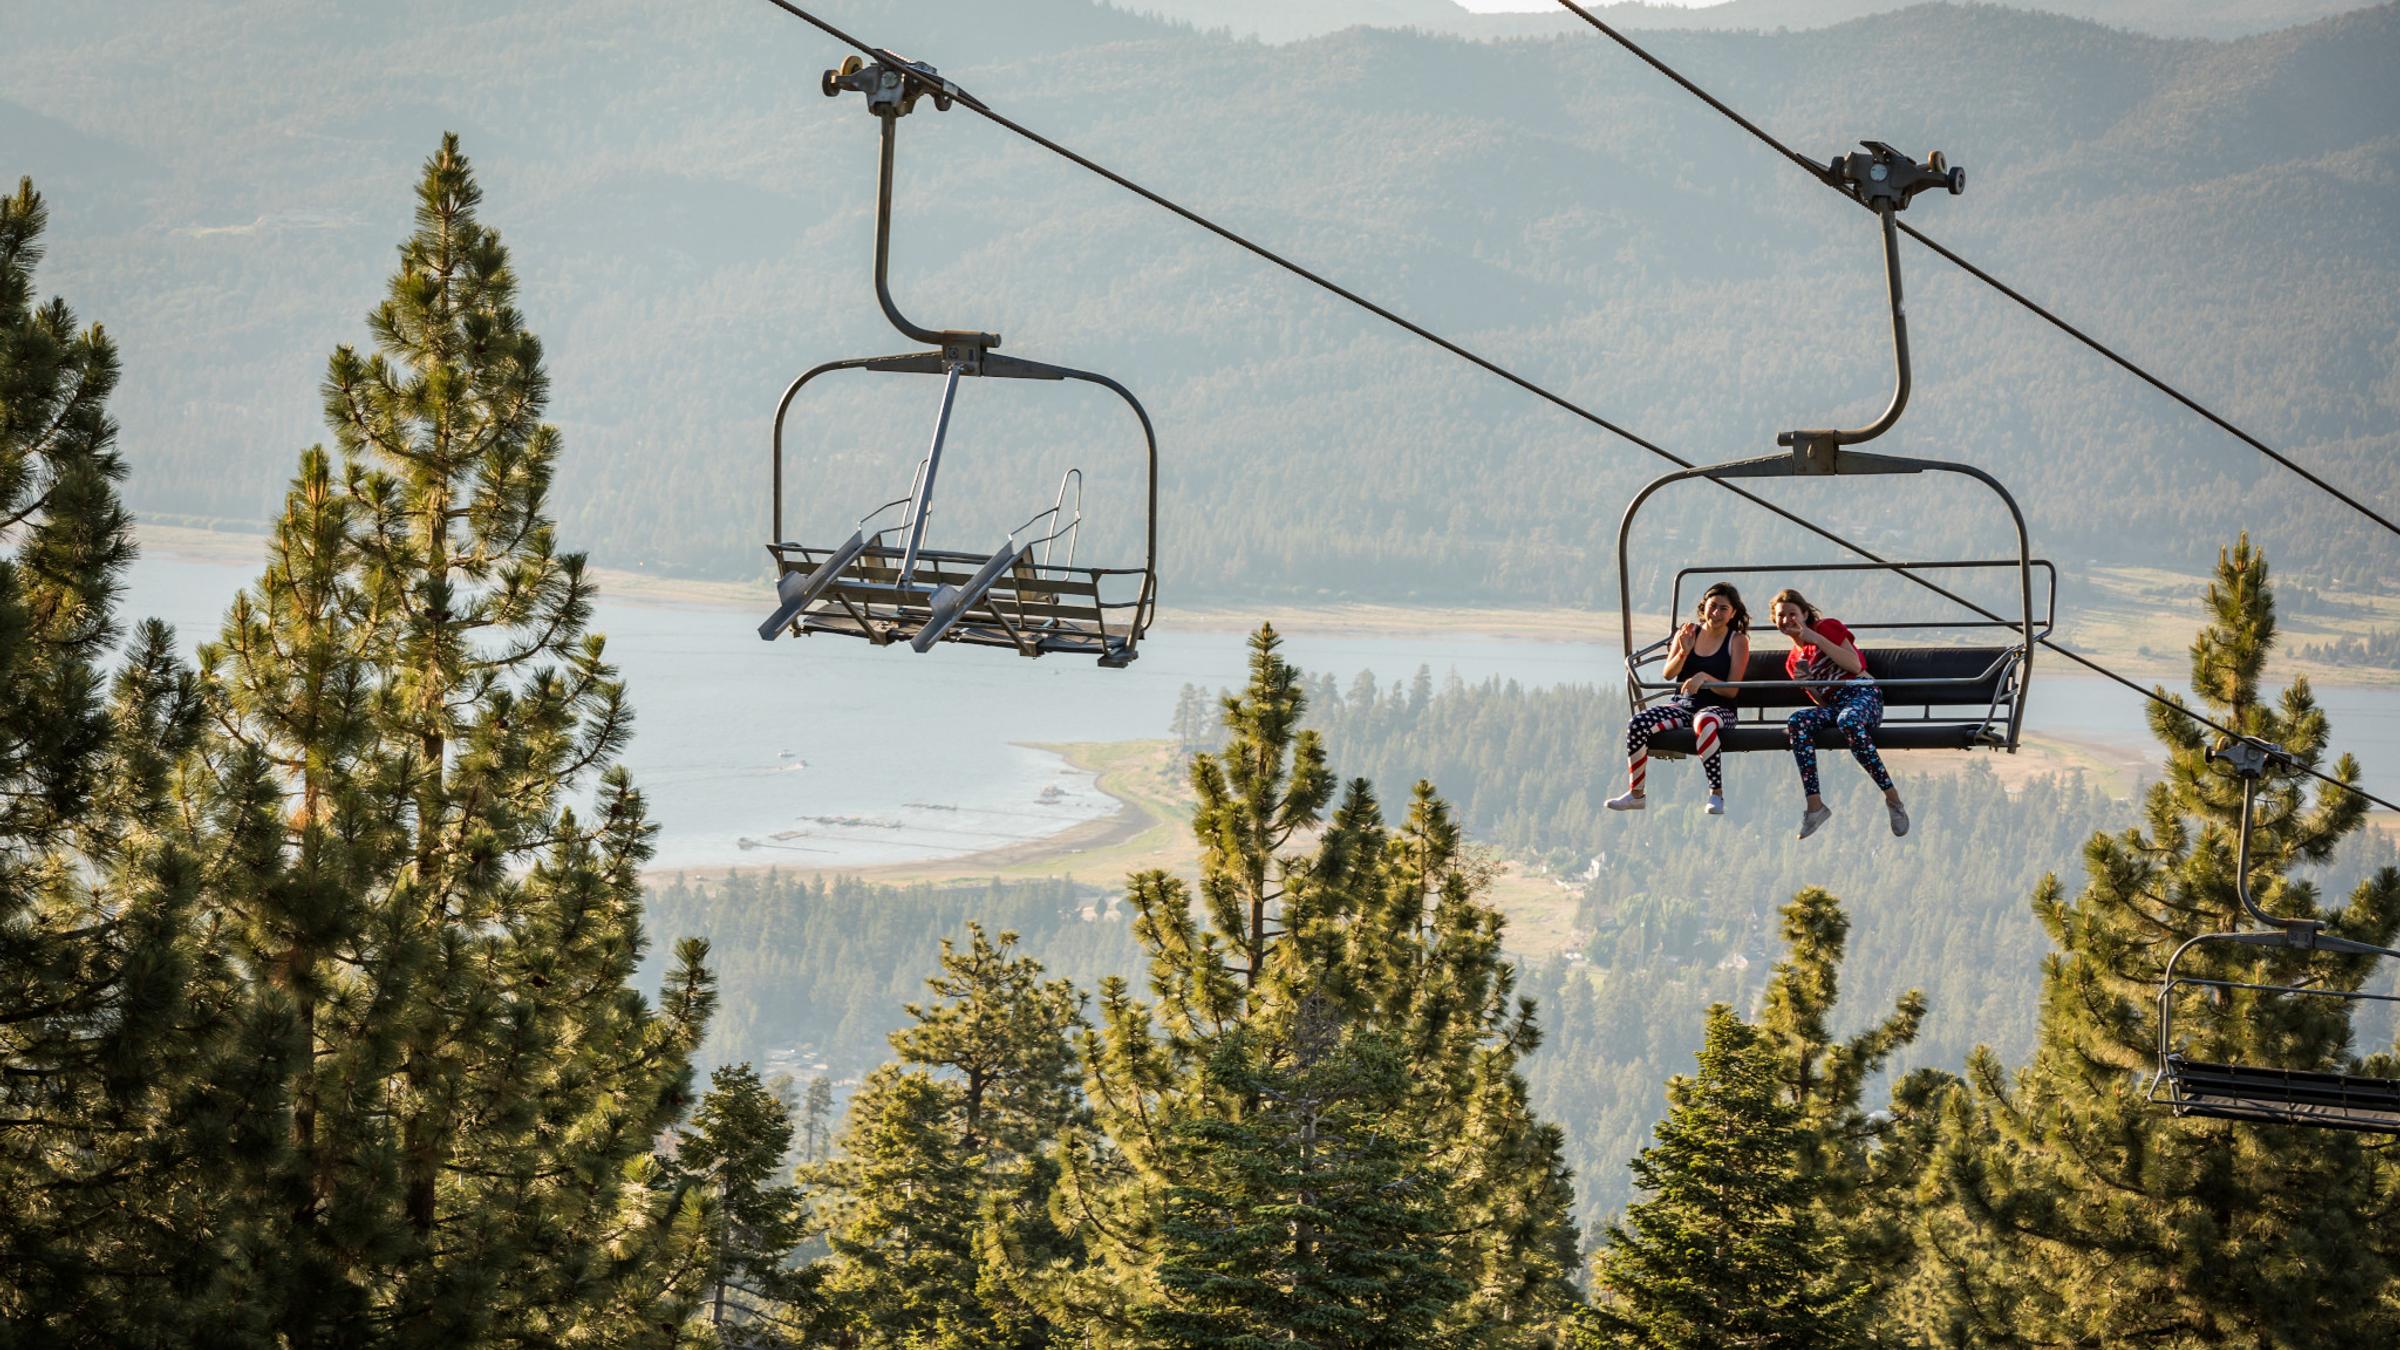 Two people riding the scenic sky chair with big bear lake in the background